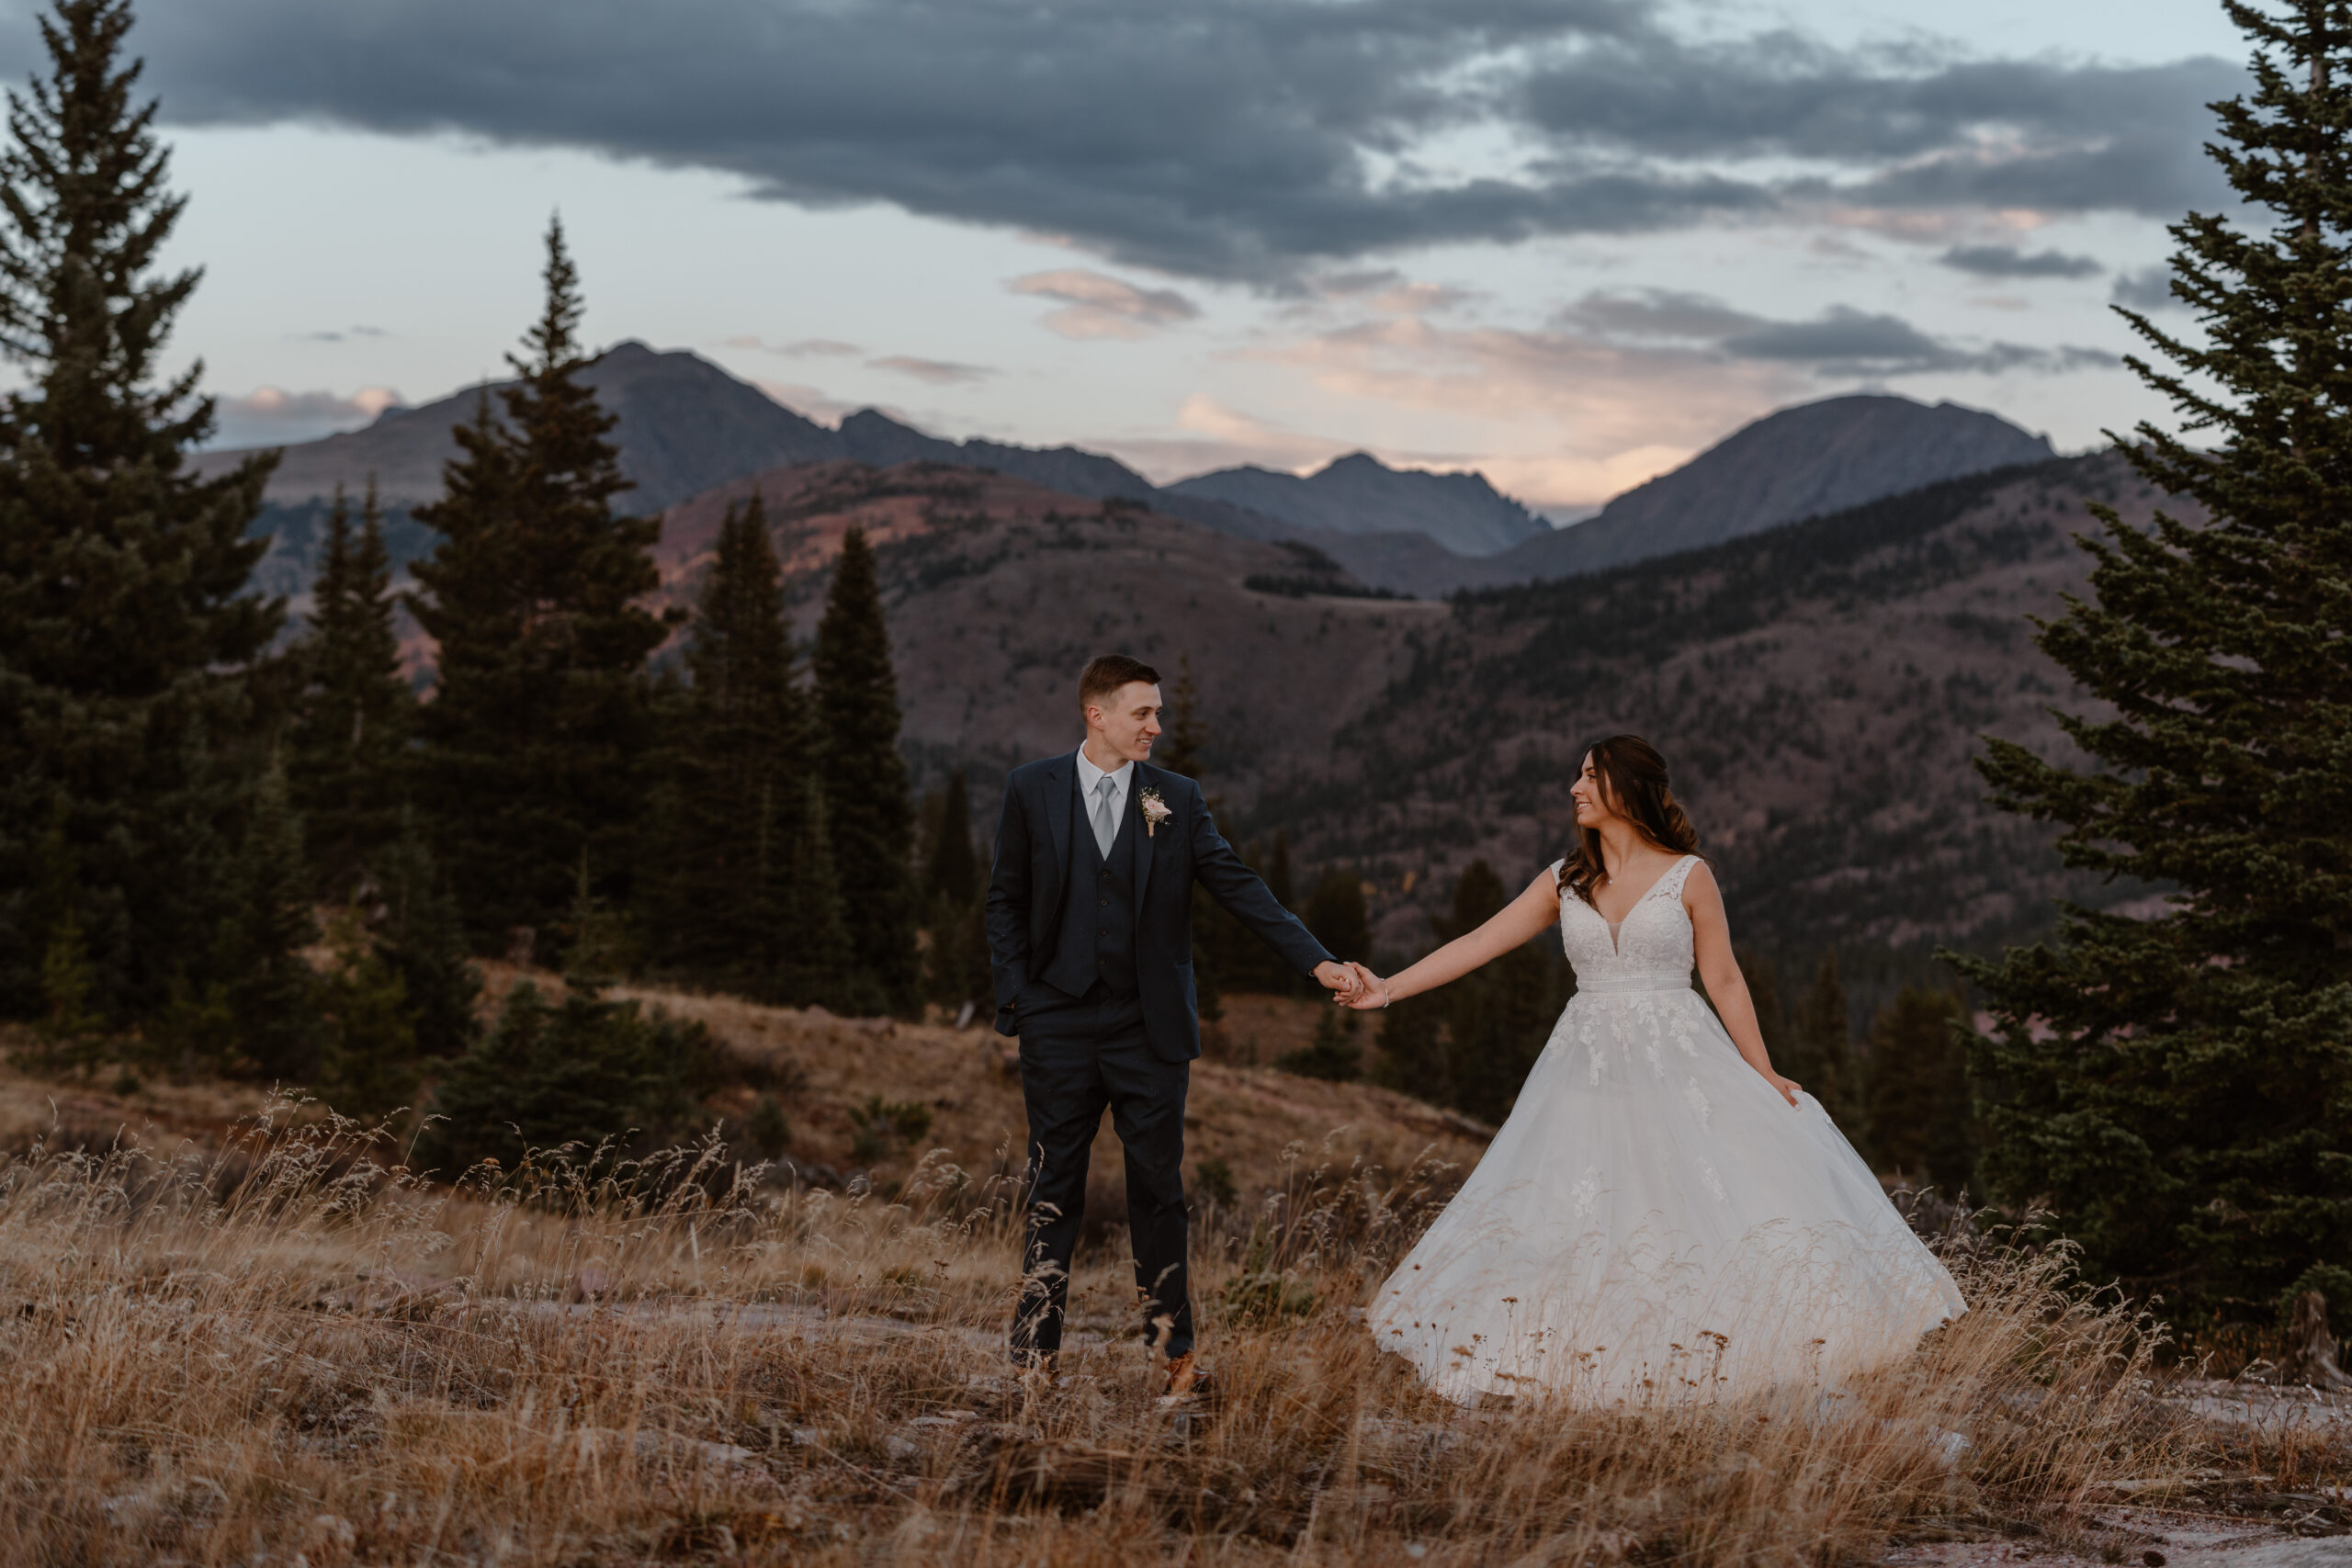 A bride and groom take in the views during their Fall Vail elopement.